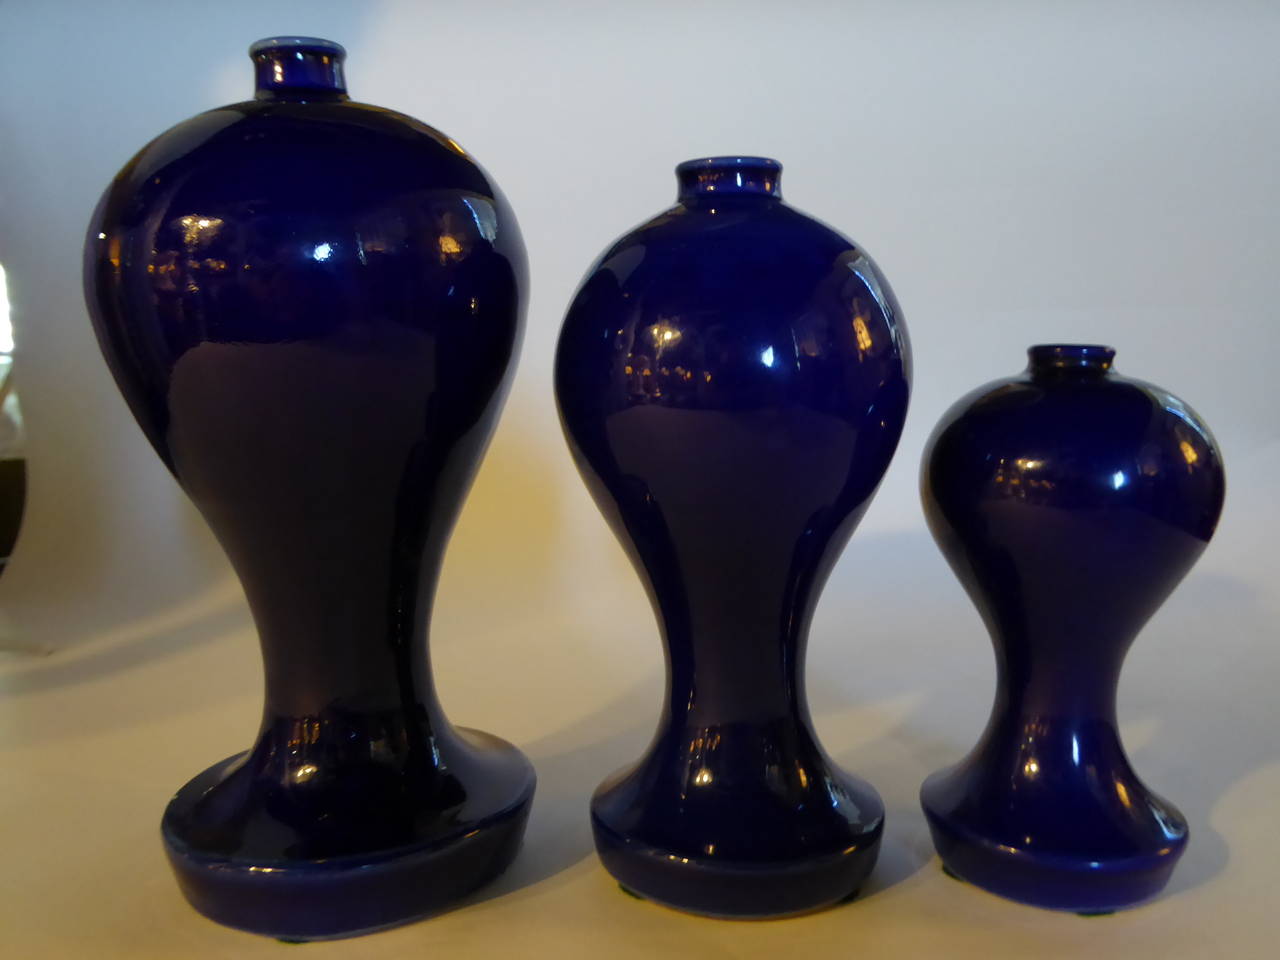 Set of three inspiring Japanese cobalt blue glazed pottery altar vases in three sizes. Created in the late 1930s during the Showa period (1926-1989).

Dimensions: 7 1/2" H x 3 3/4" diameter.
6 1/2" H x 3 “diameter.
5" x 2 1/2